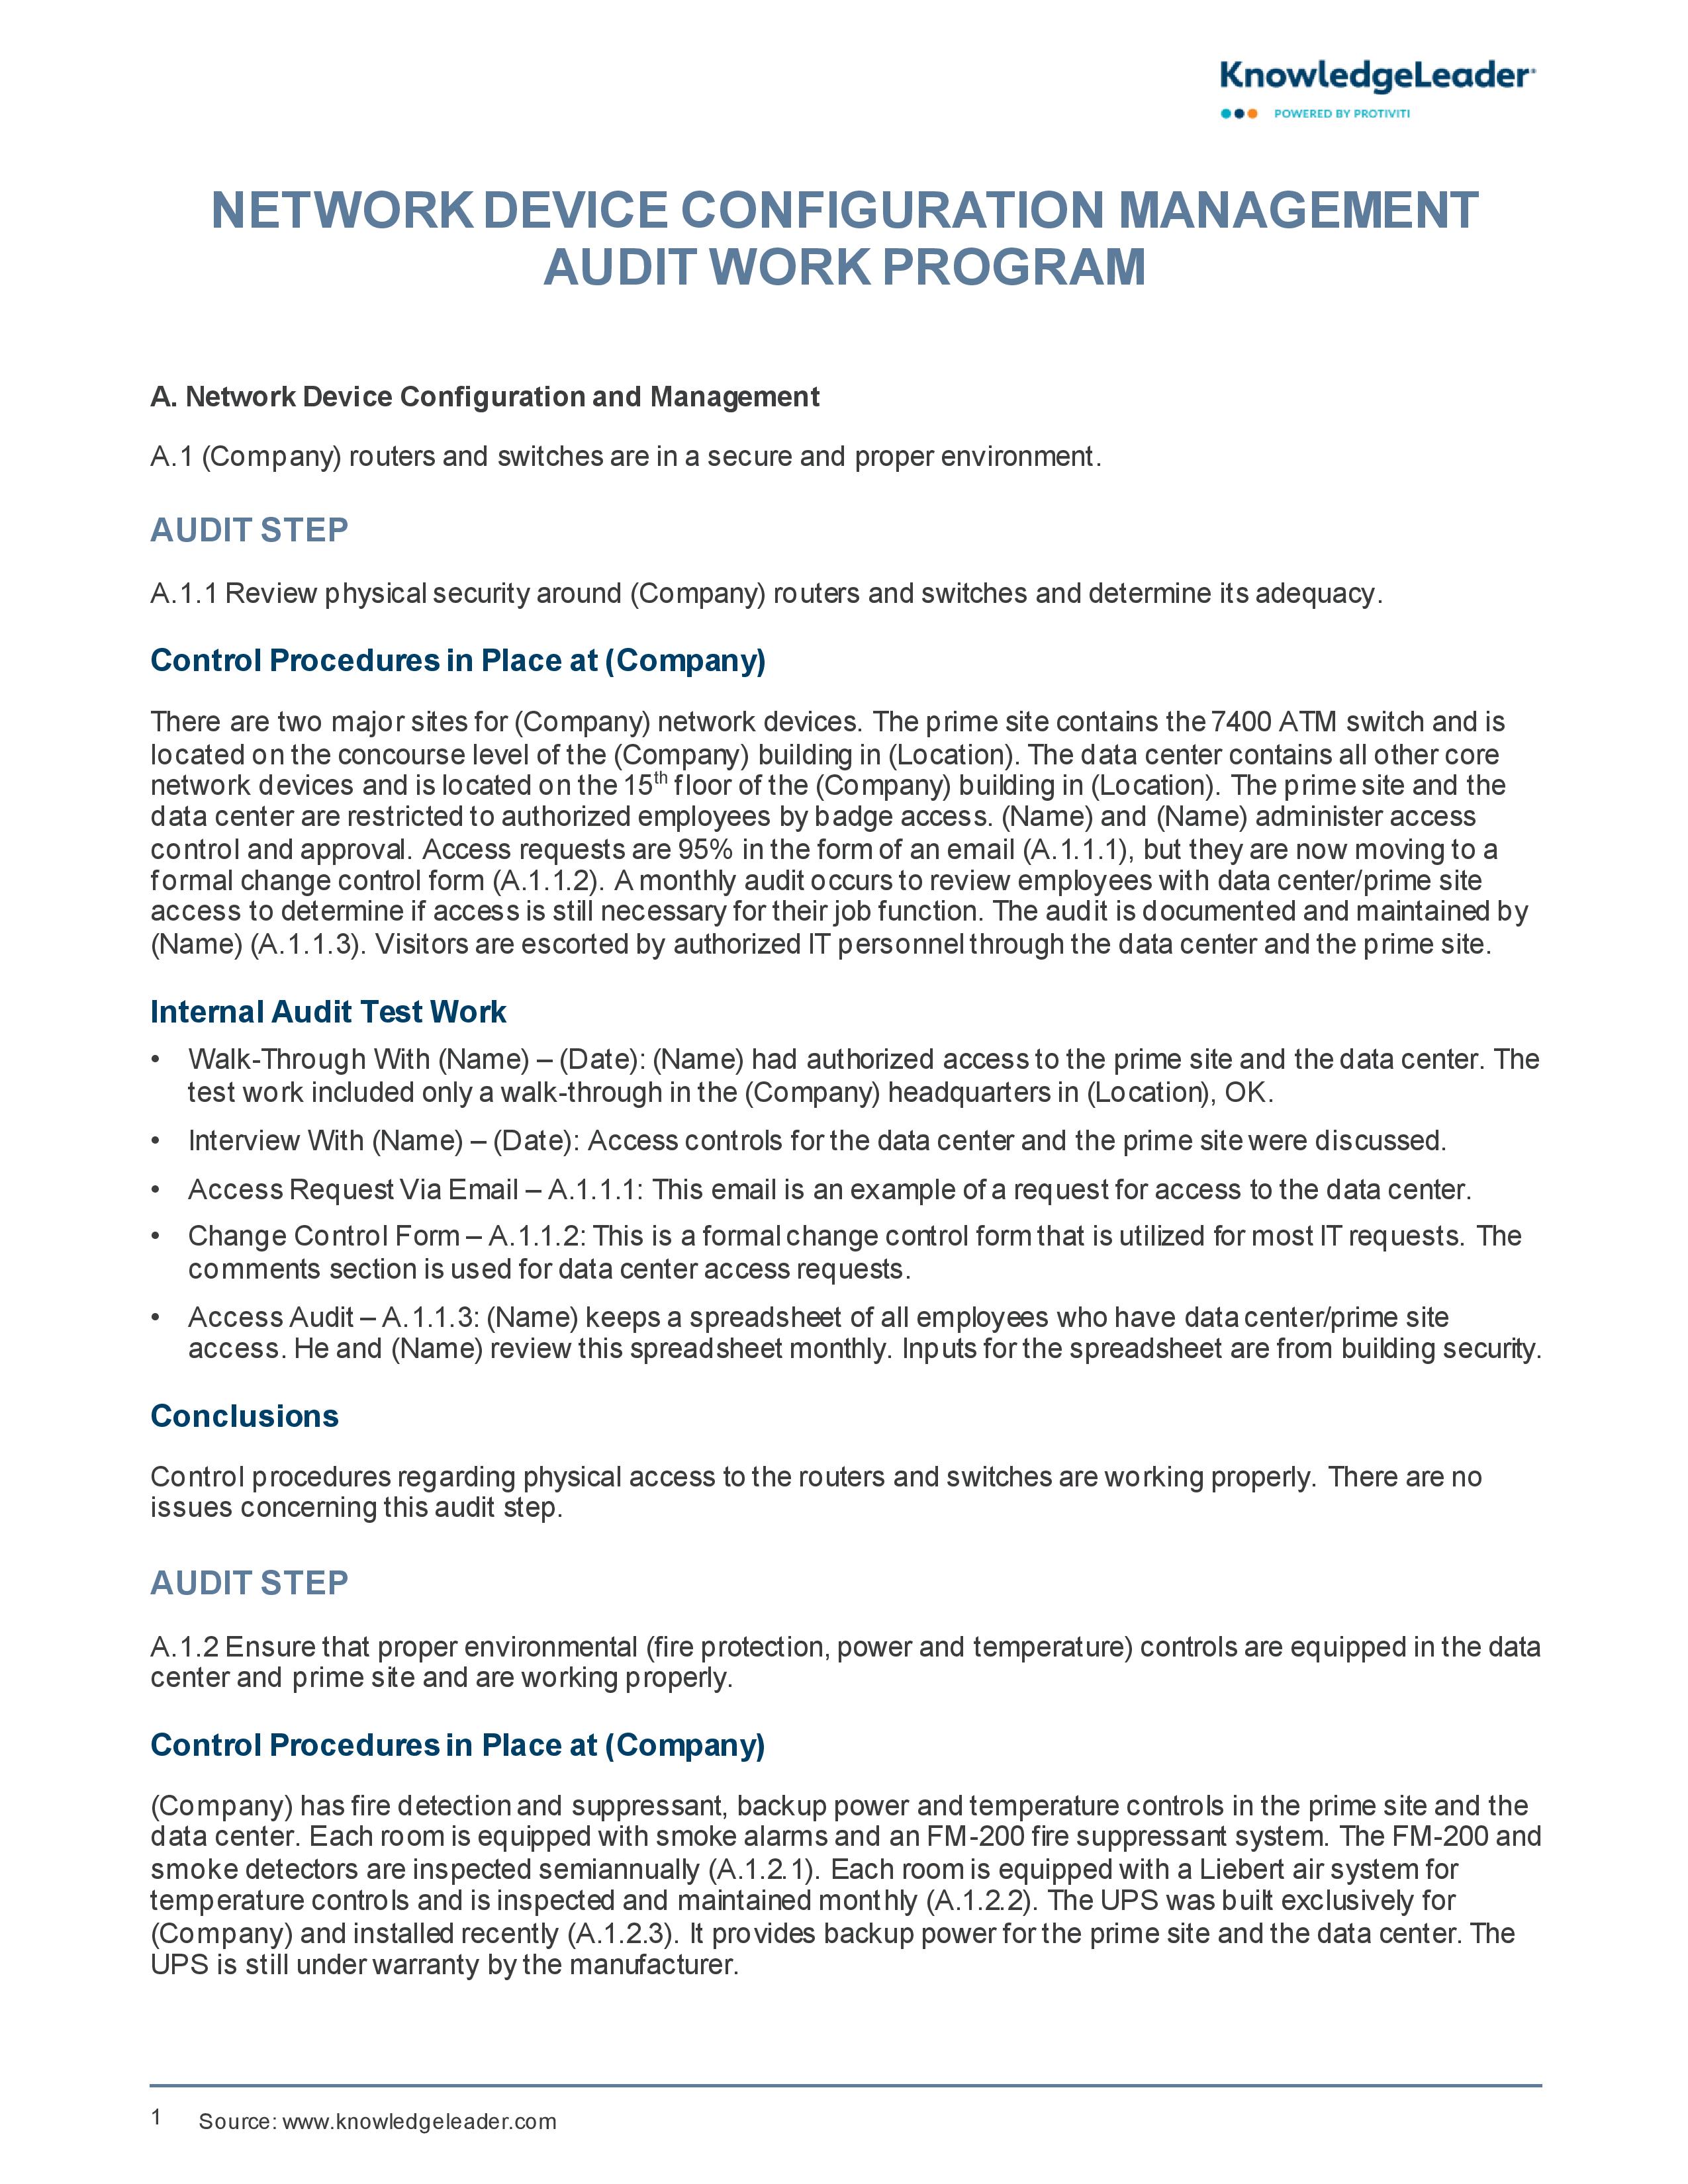 Screenshot of the first page of Network Device Configuration Management Audit Work Program